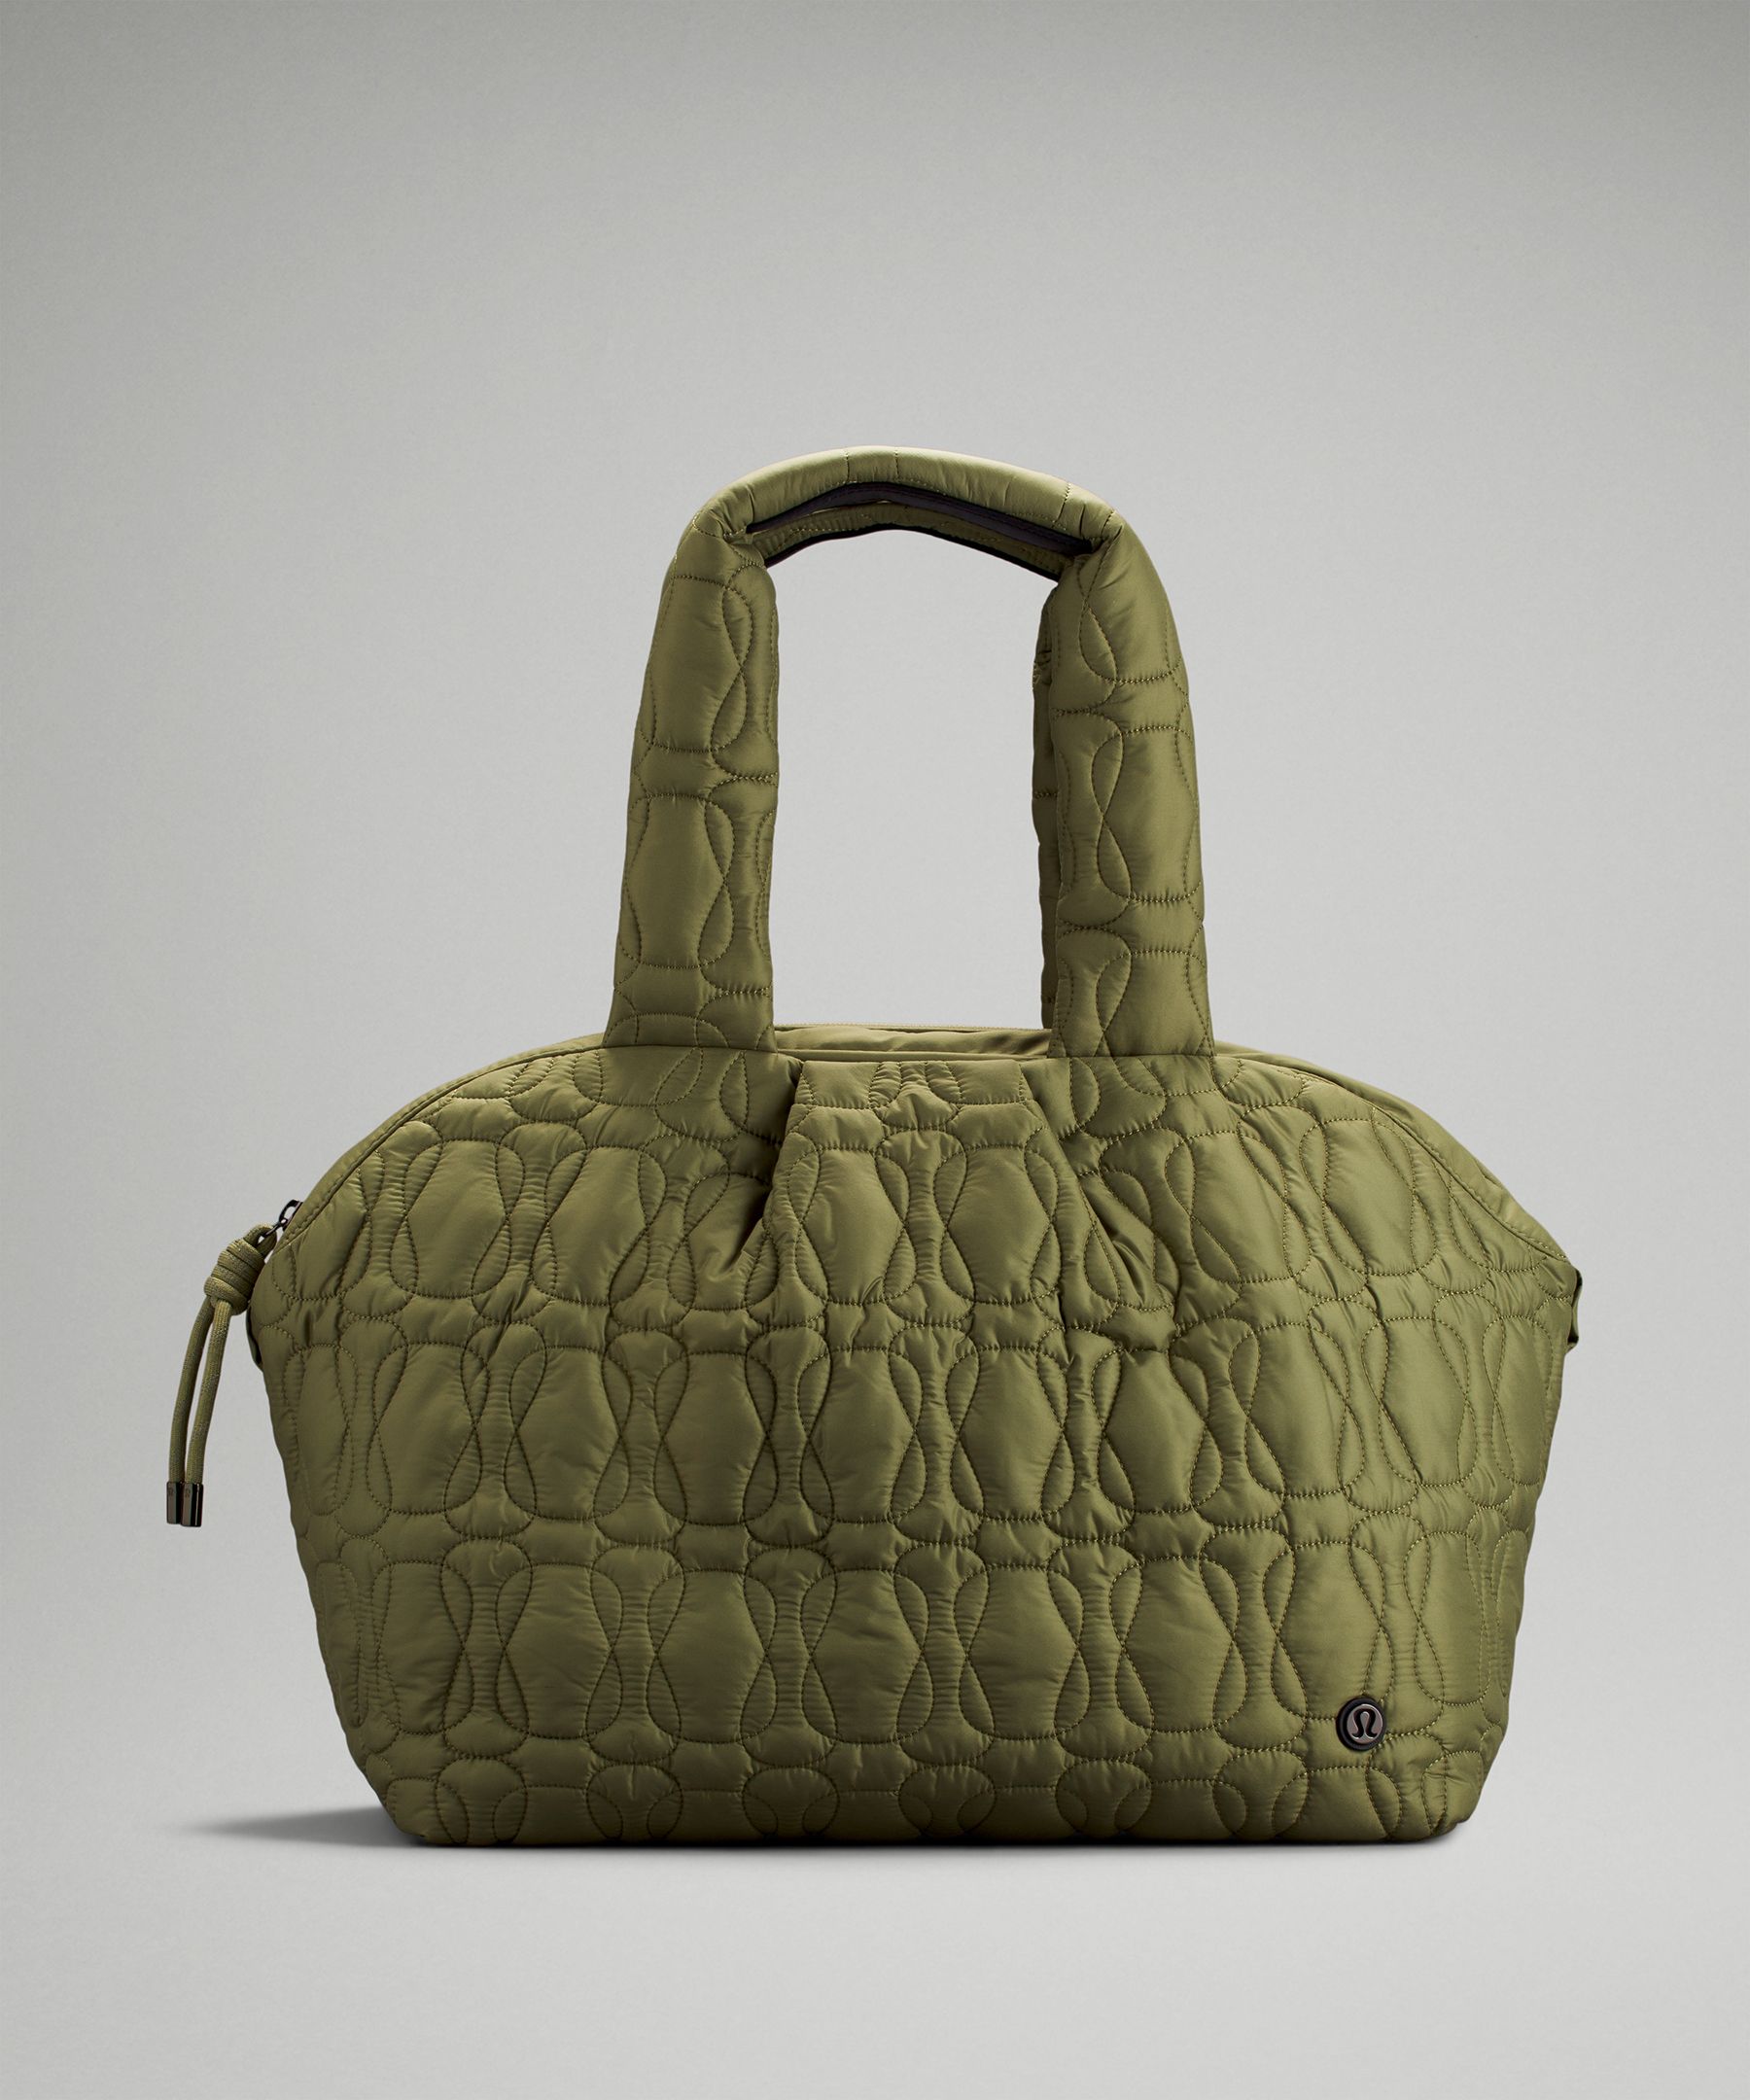 Lululemon Quilted Embrace Tote Bag 20l In Bronze Green